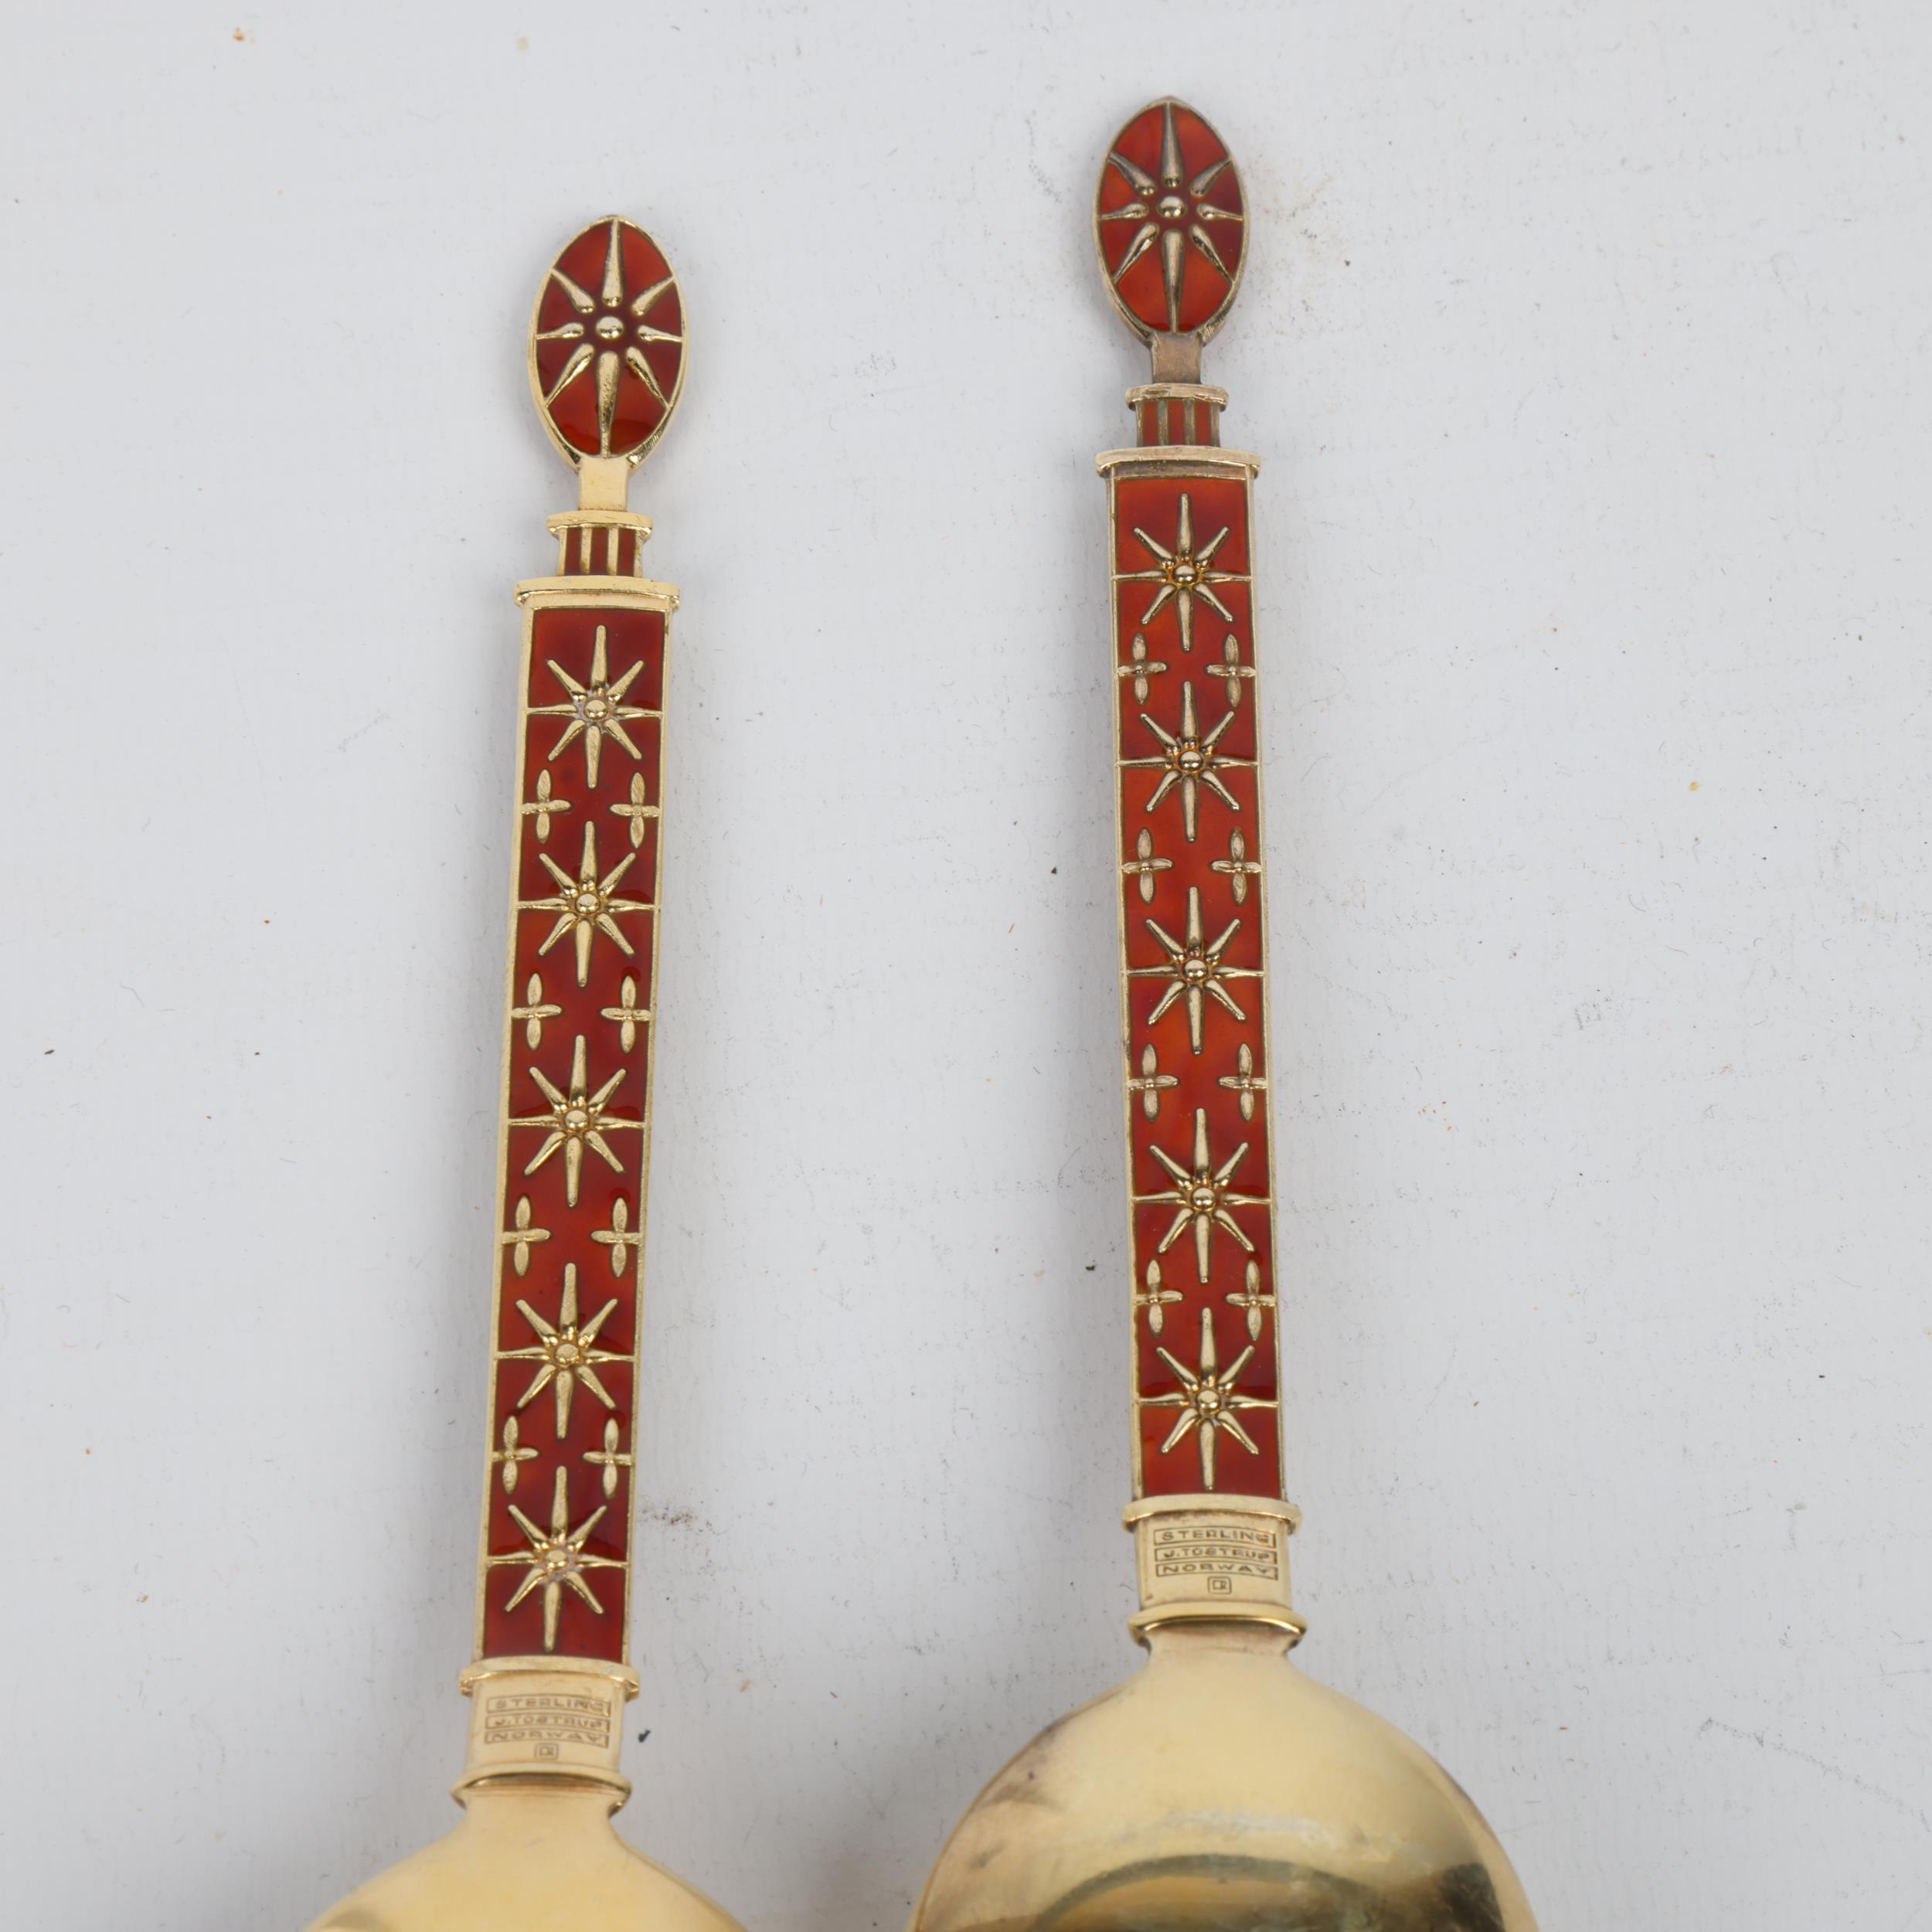 J TOSTRUP - a pair of Norwegian modernist sterling silver-gilt red enamel servers, Oslo circa - Image 3 of 3